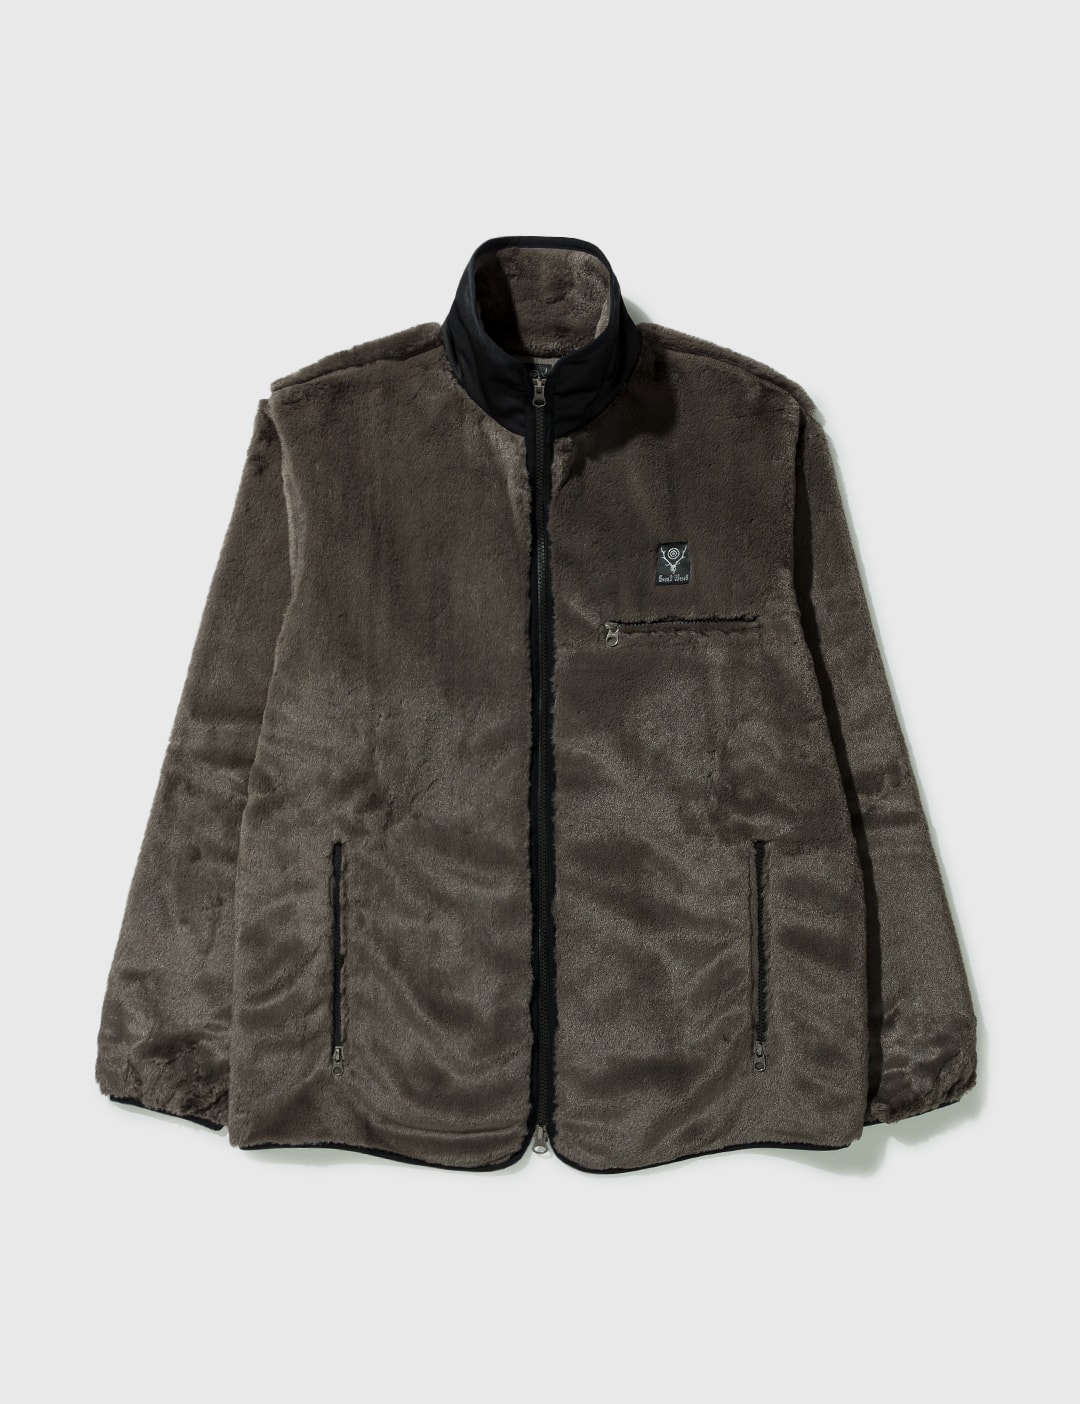 South2 West8 - Piping Globally HBX Hypebeast Jacket Lifestyle and by Fashion Curated | 